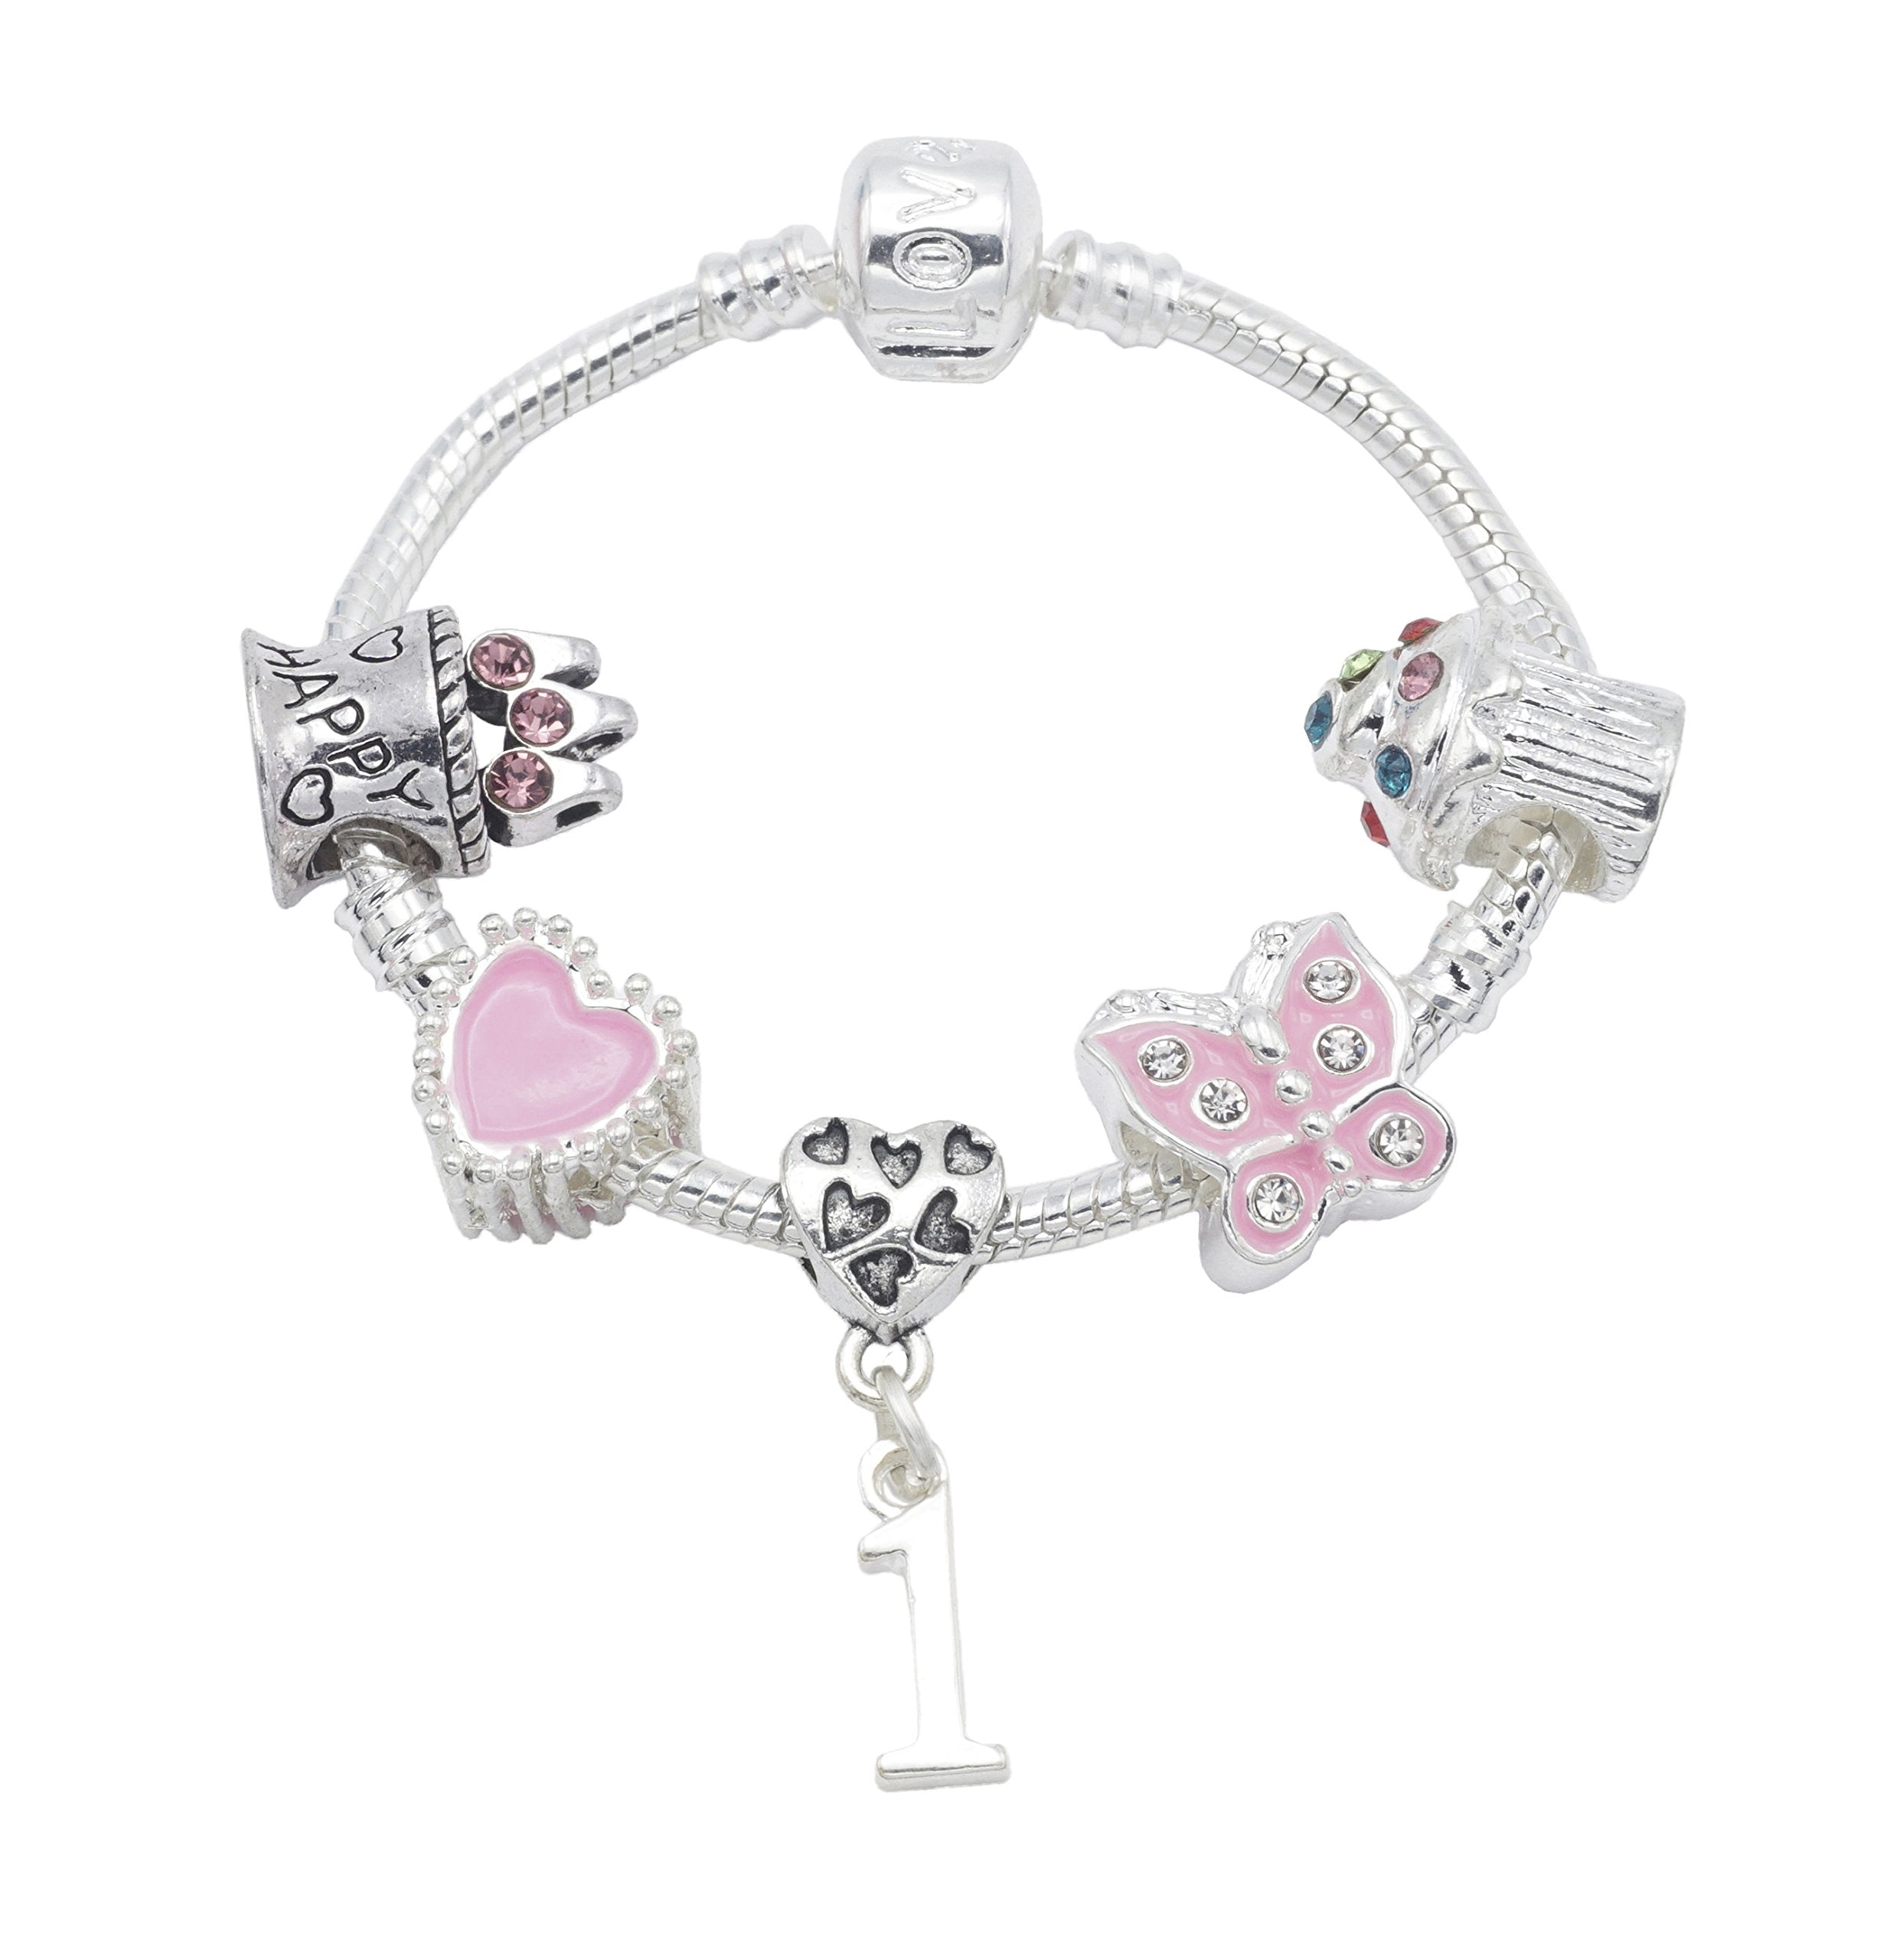 1st Birthday Silver Plated Charm Bracelet for Girls with Gift Box